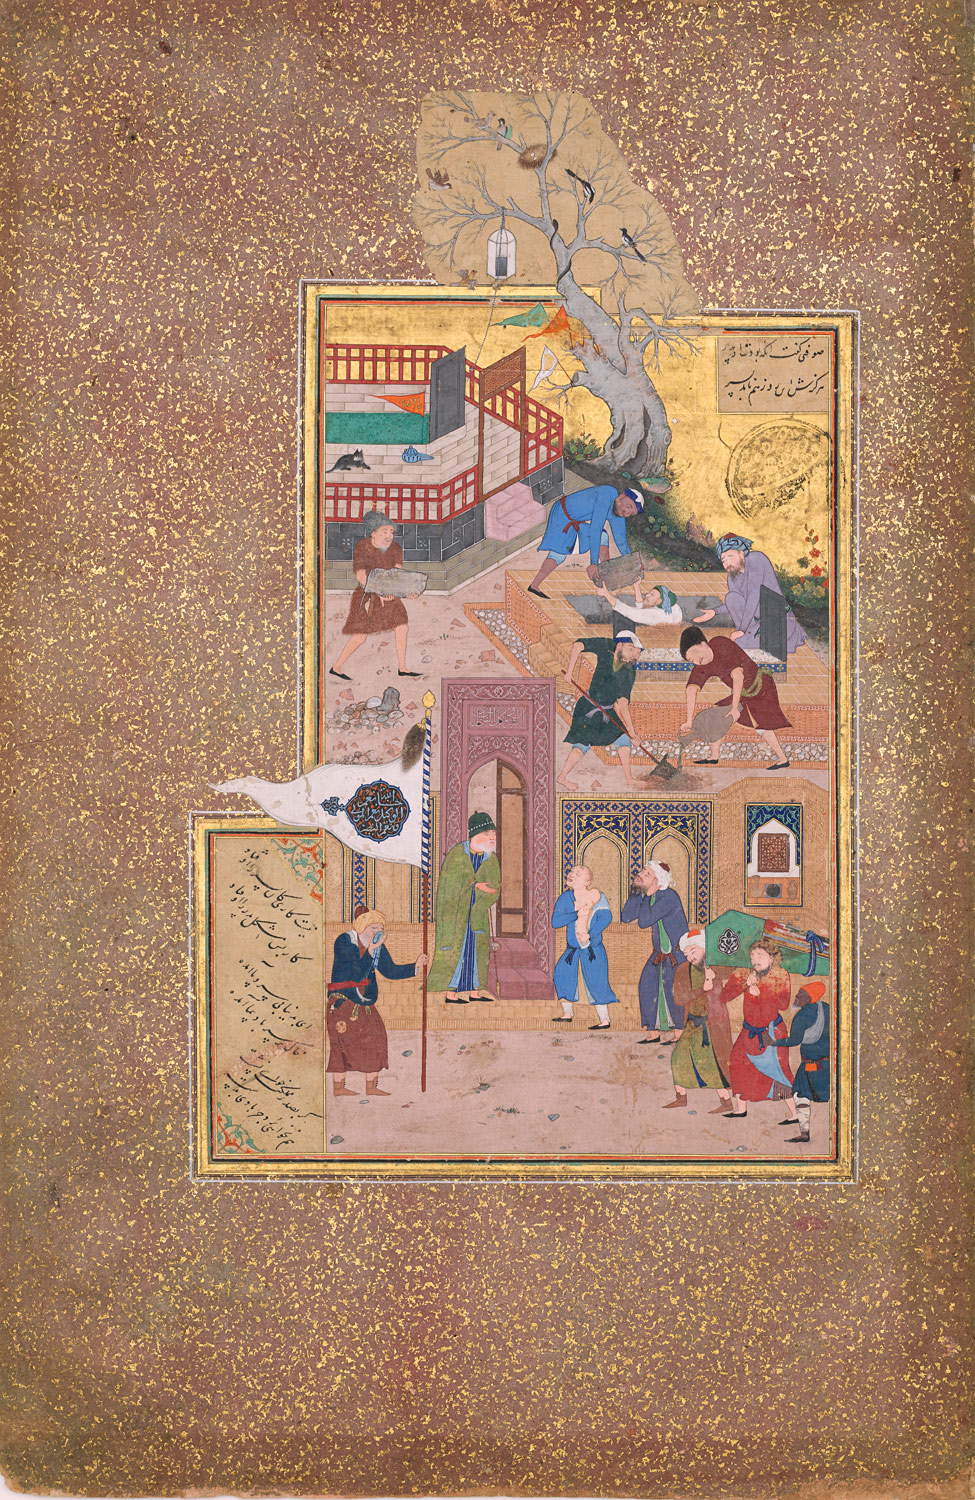 Funeral Procession, Folio 35r from a Mantiq al-tair (Language of the Birds)